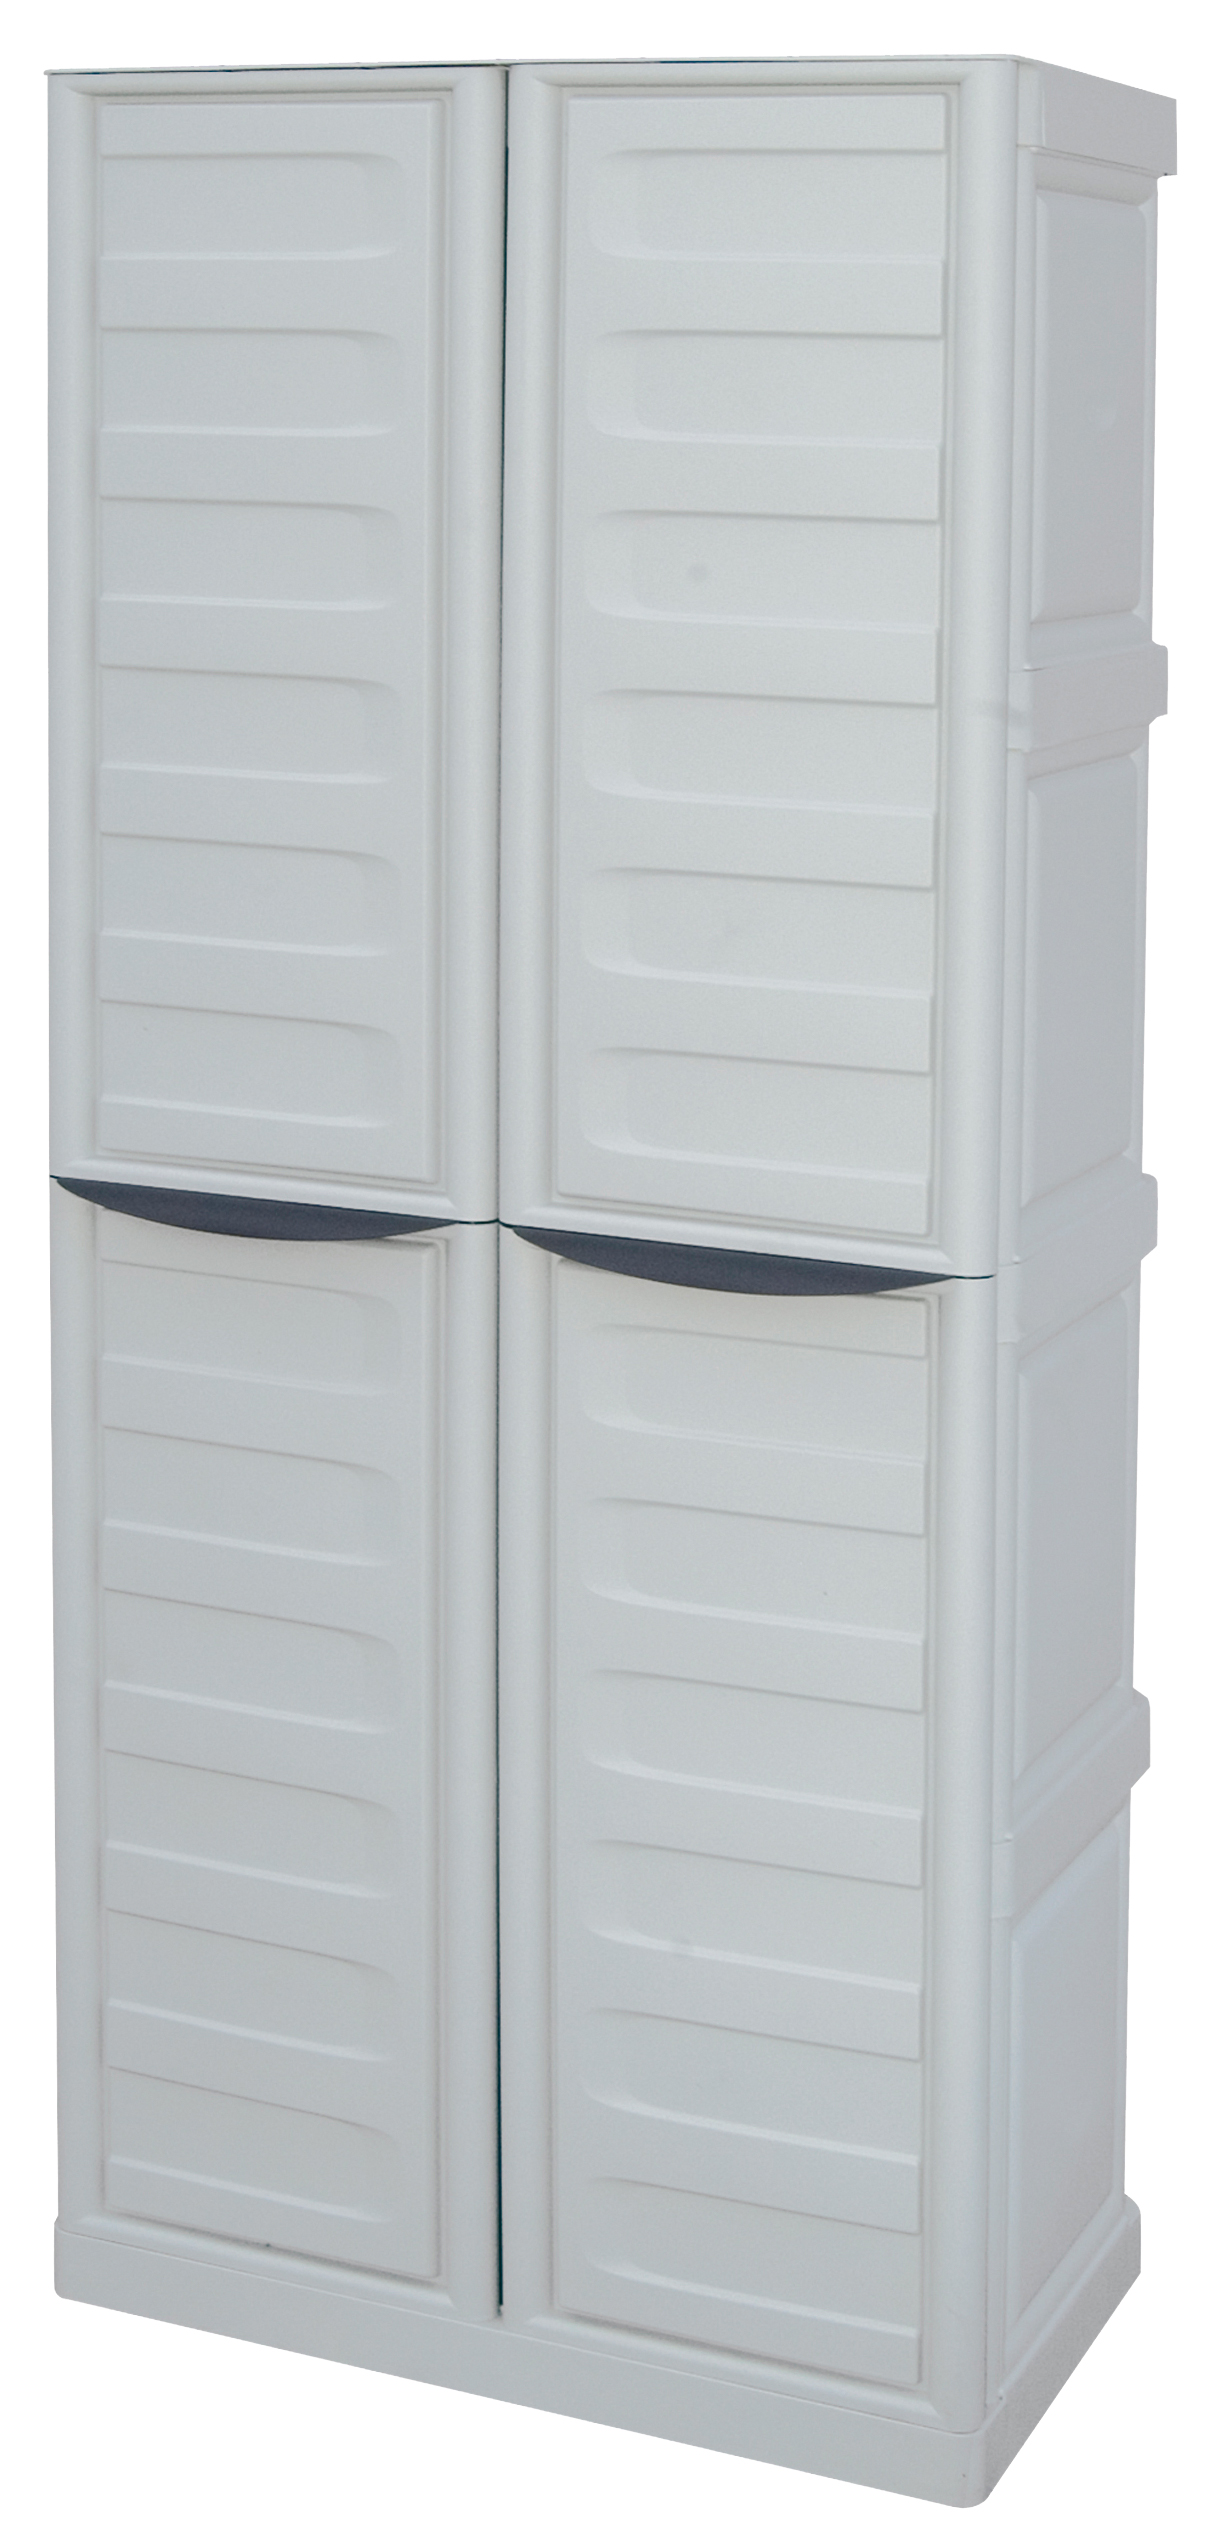 Plastic Cabinet with Shelves and broom space Spazio Unimac - 2